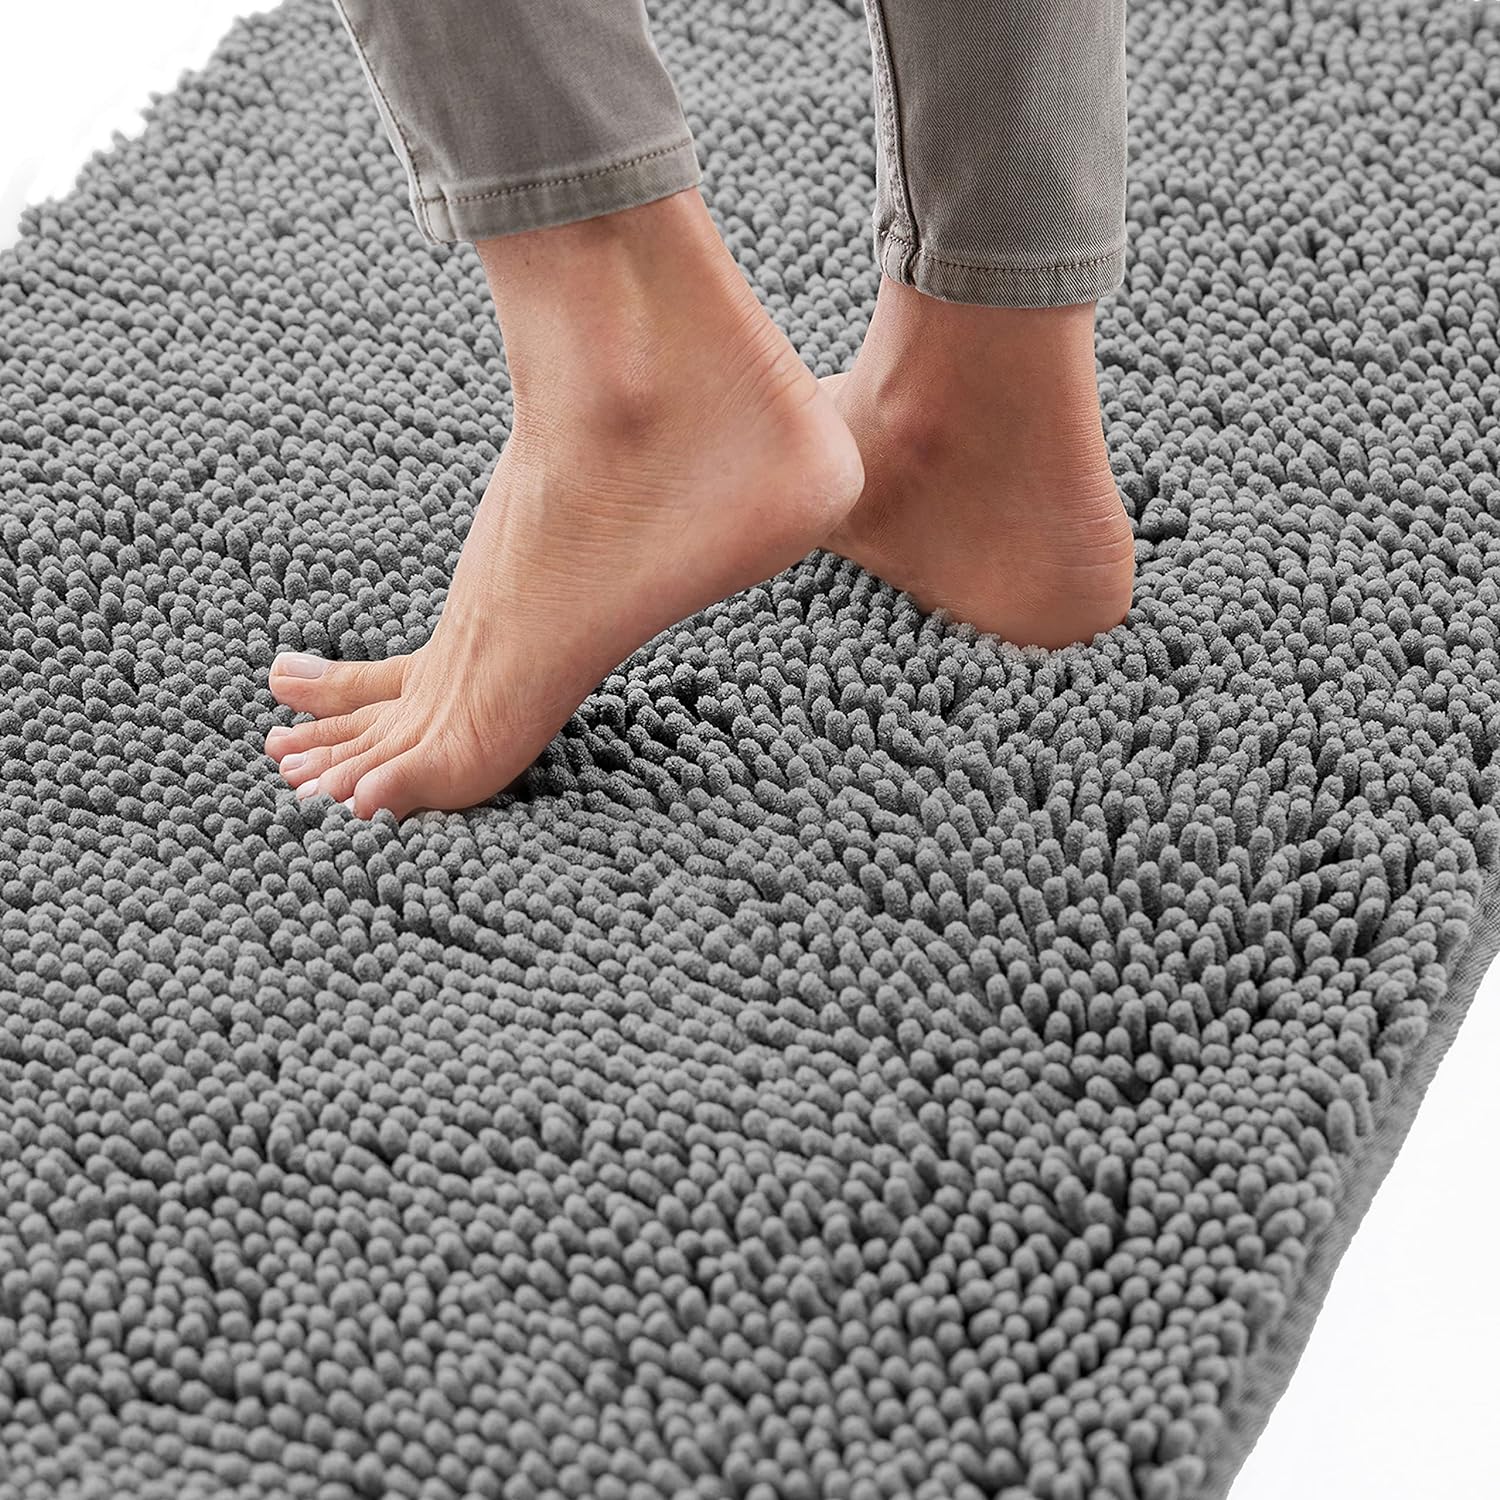 24" x 17" Gorilla Grip Quick Dry Microfiber Chenille Bath Rug w/ Rubber Backing (Grey) $7.92 + Free Shipping w/ Prime or on $35+